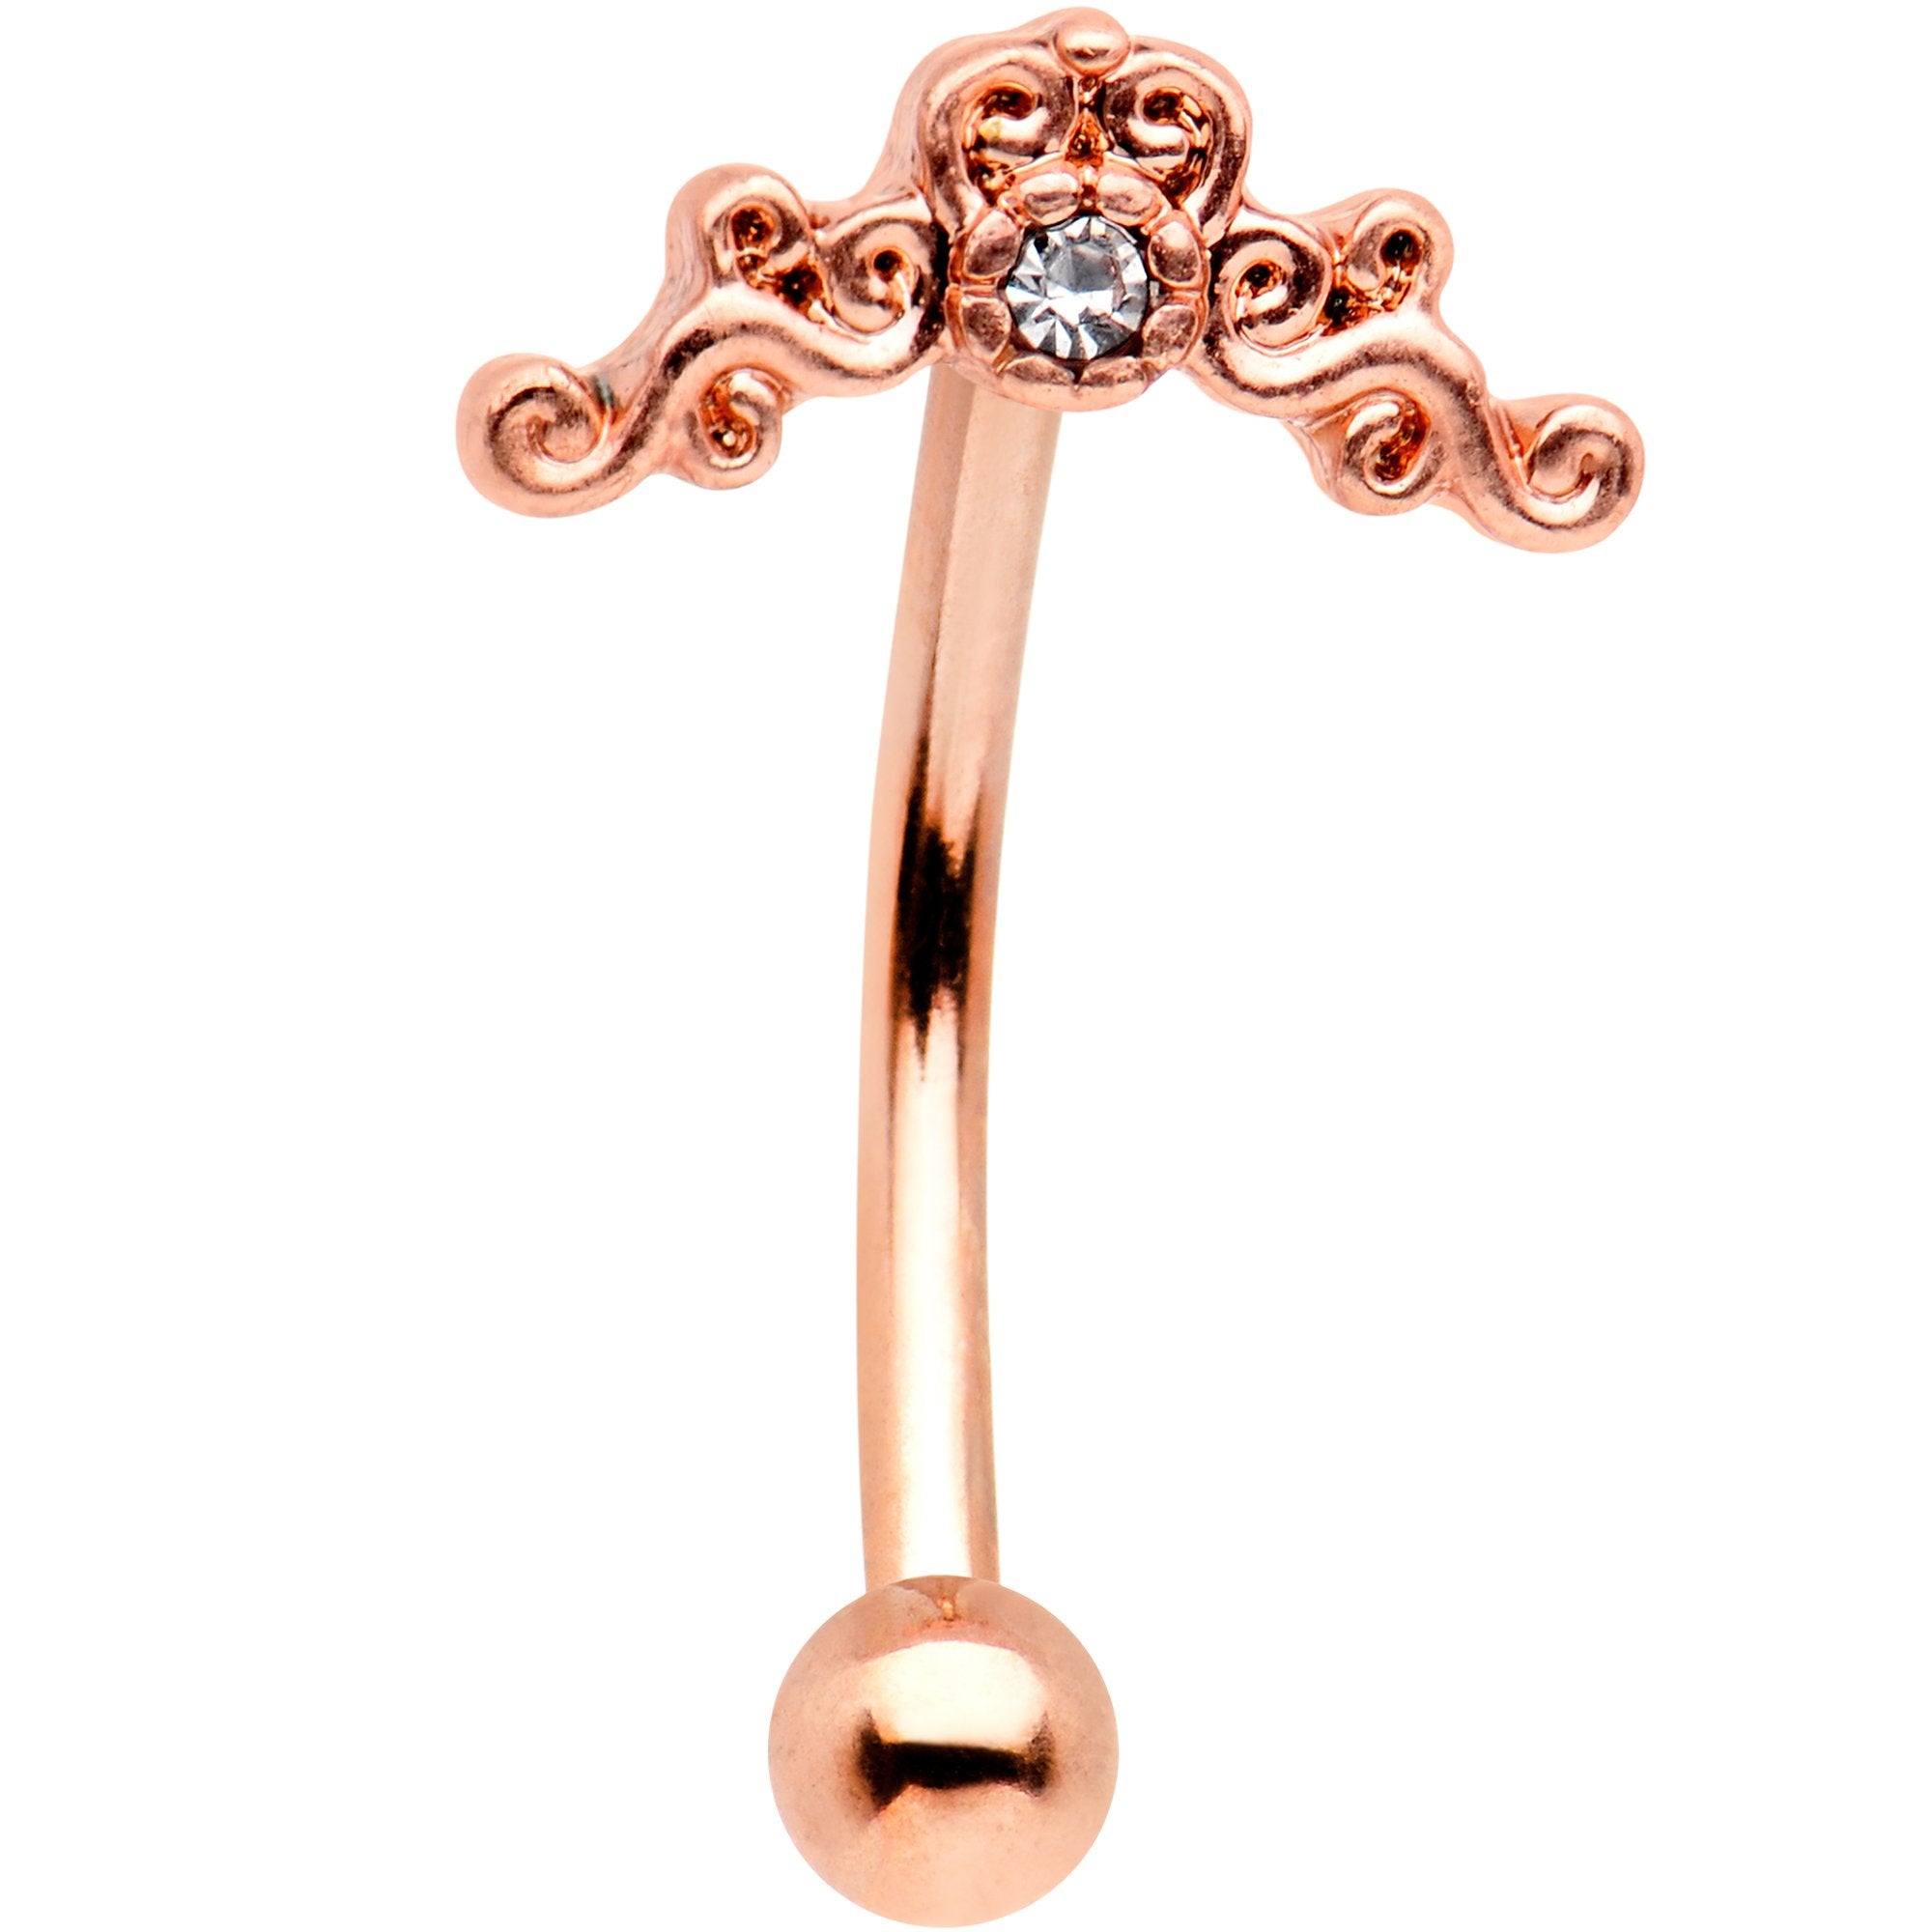 5/16 Clear Gem Rose Gold Tone Anodized Rococo Curved Eyebrow Ring